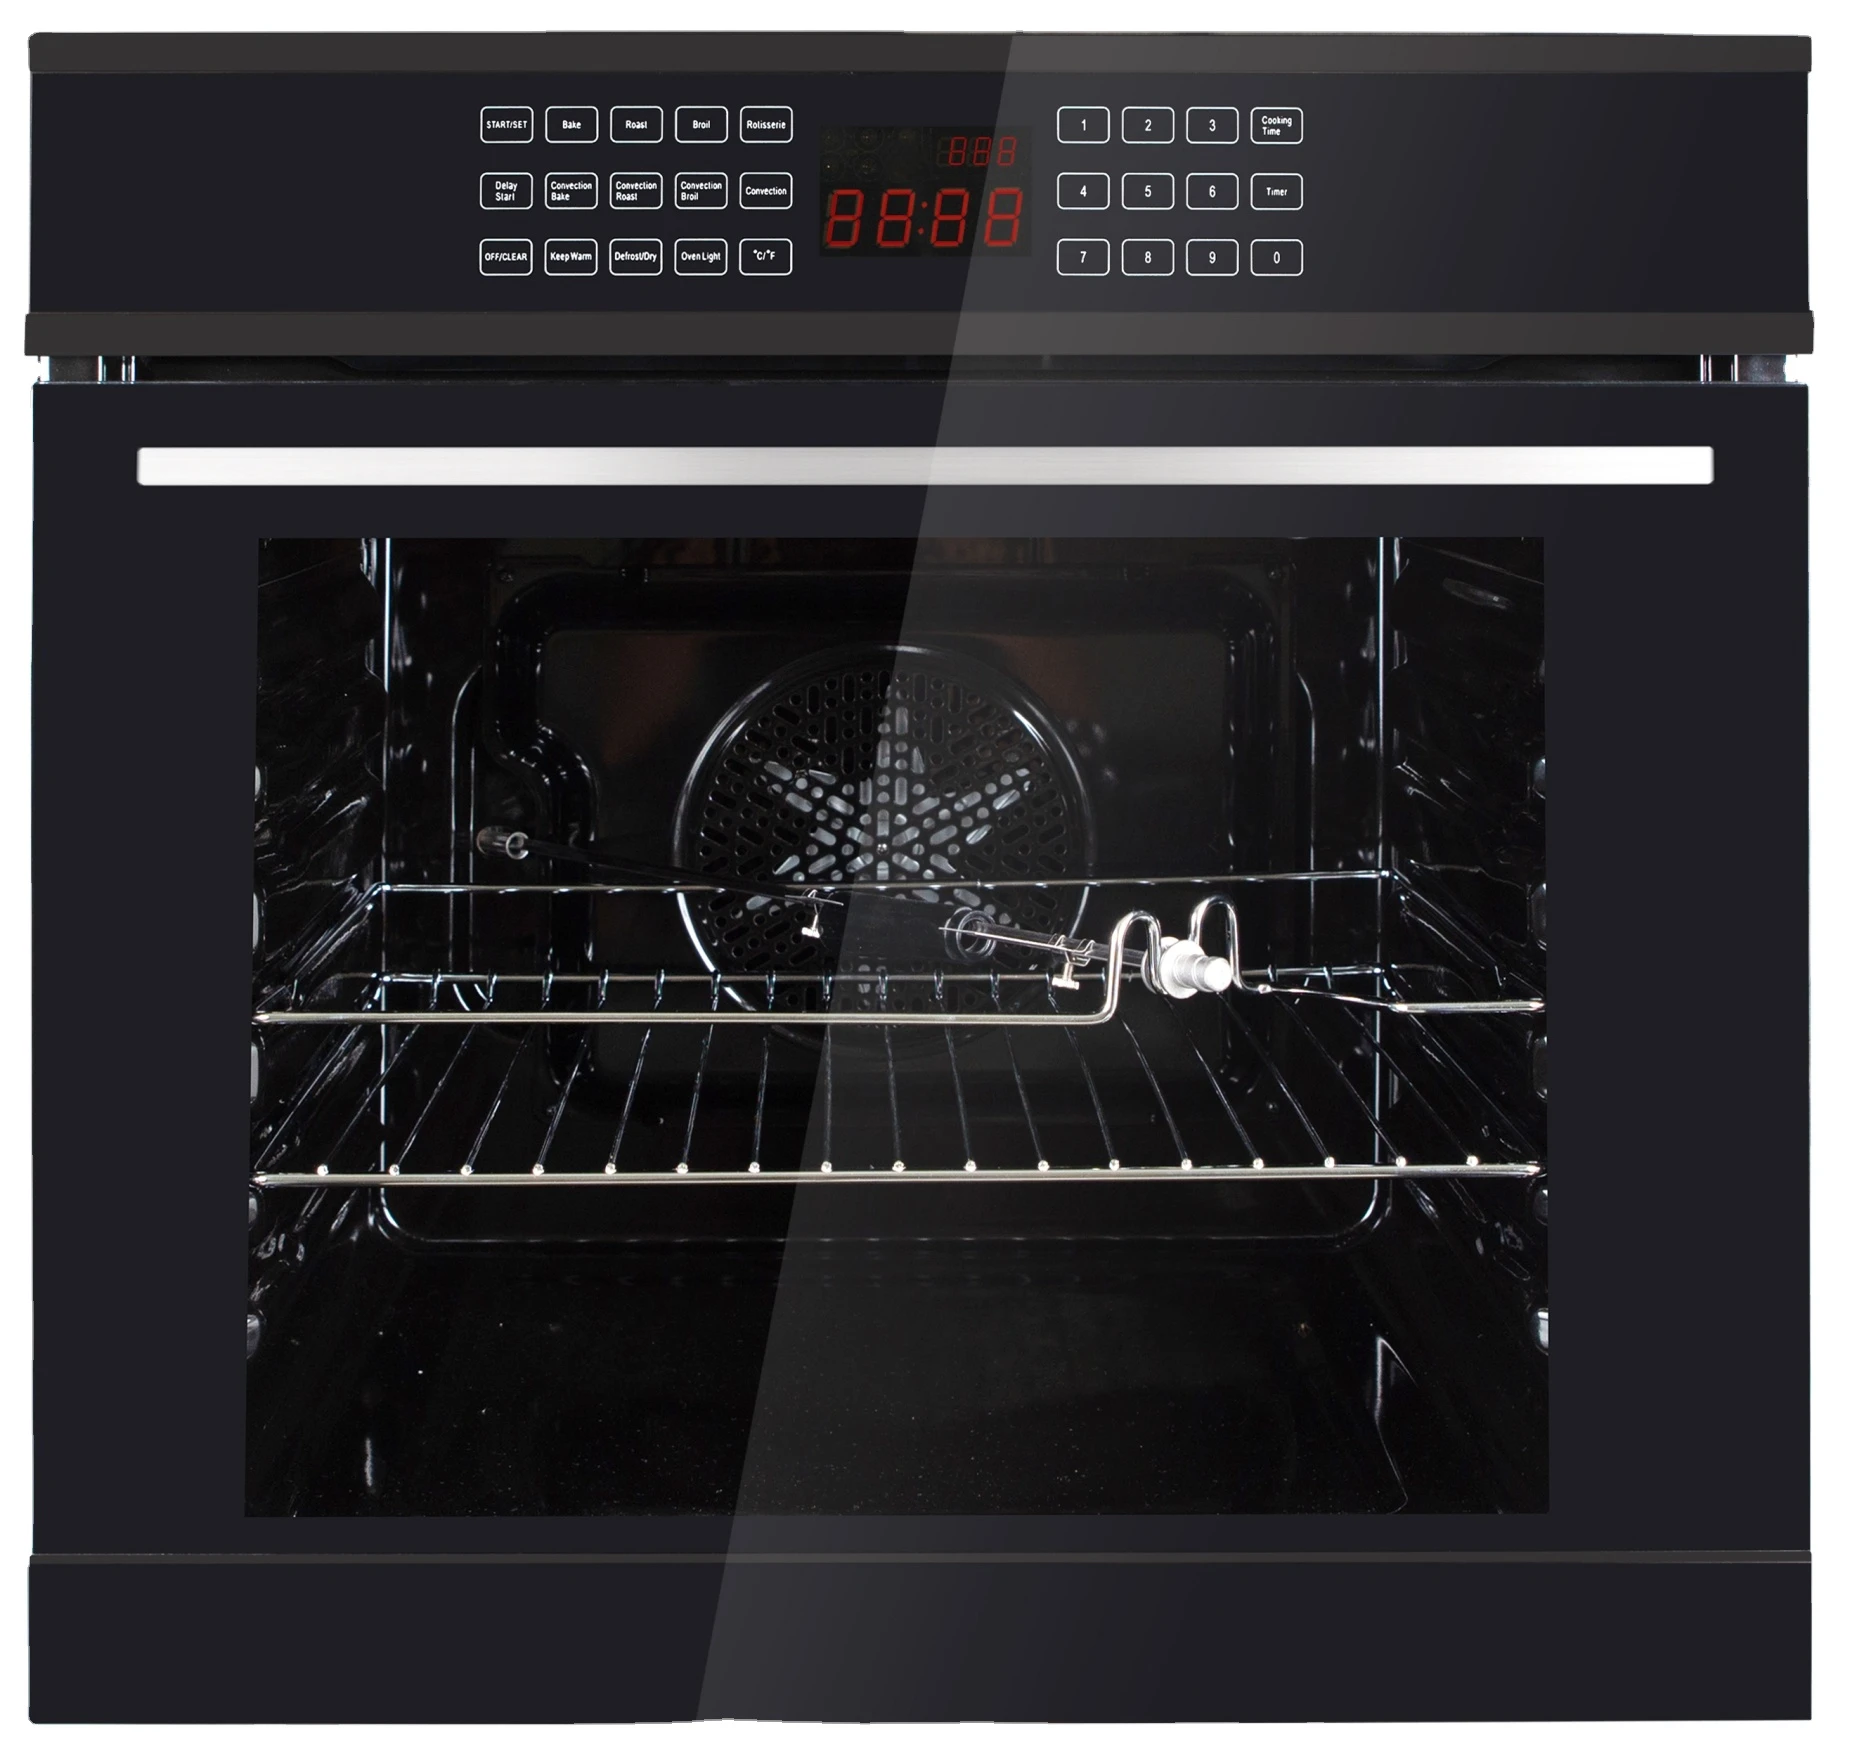 Top Quality Galvanized Body Electric Ignition Temperature Control Built In Pizza Oven Convection Oven